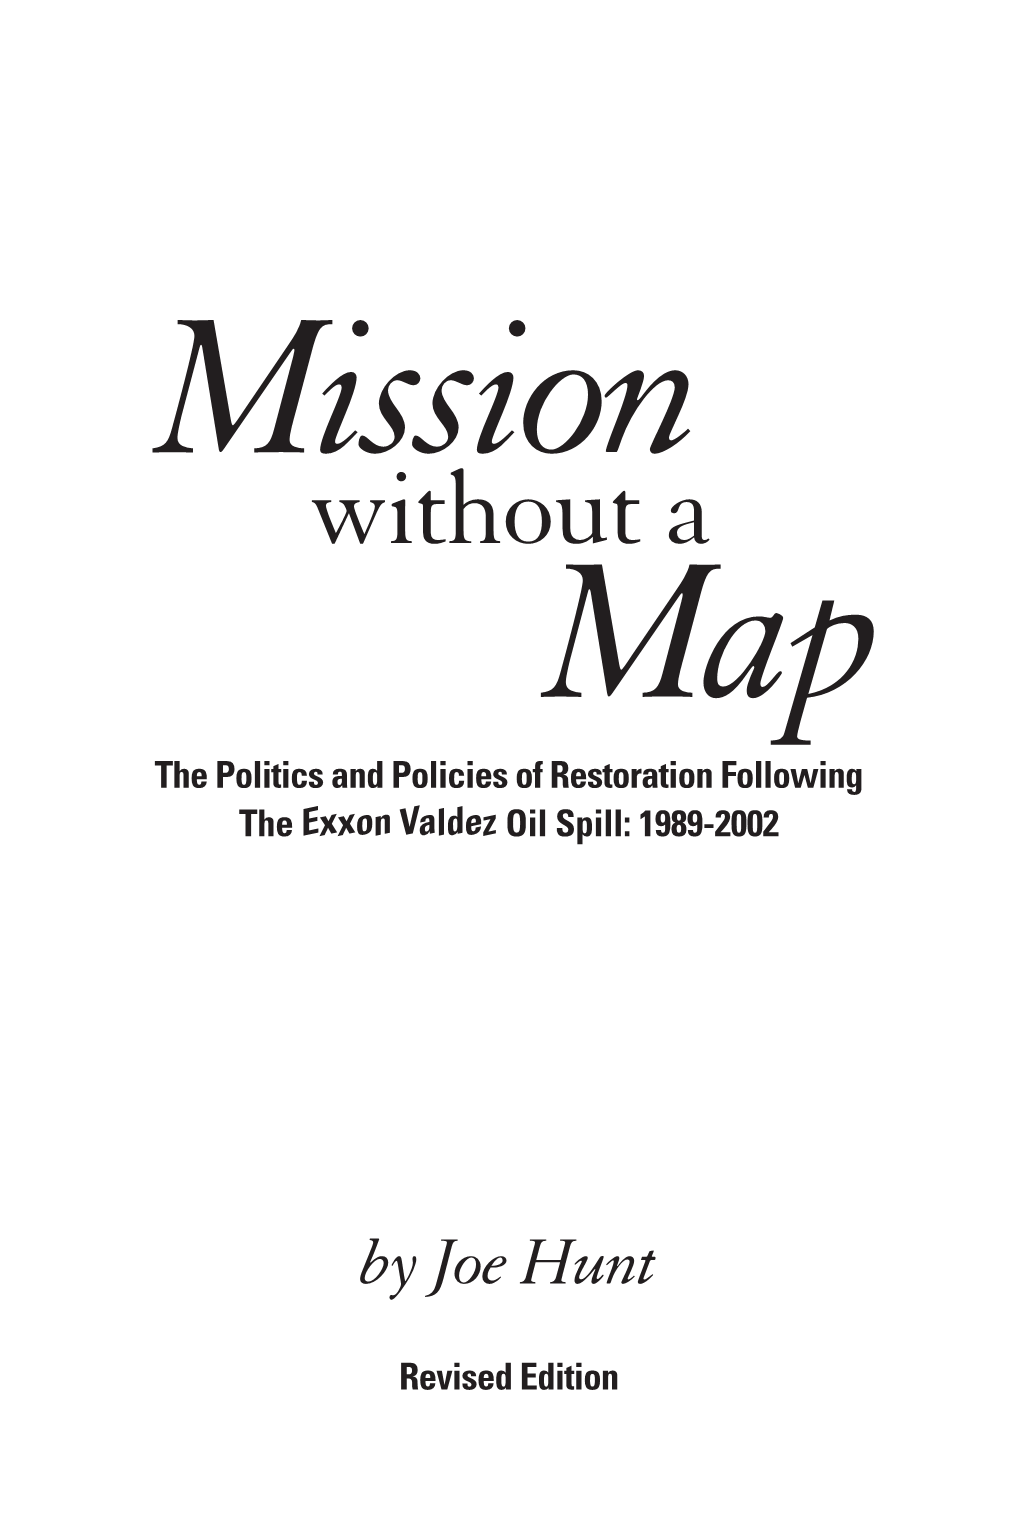 Mission Without a Map the Politics and Policies of Restoration Following the Exxon Valdez Oil Spill: 1989-2002